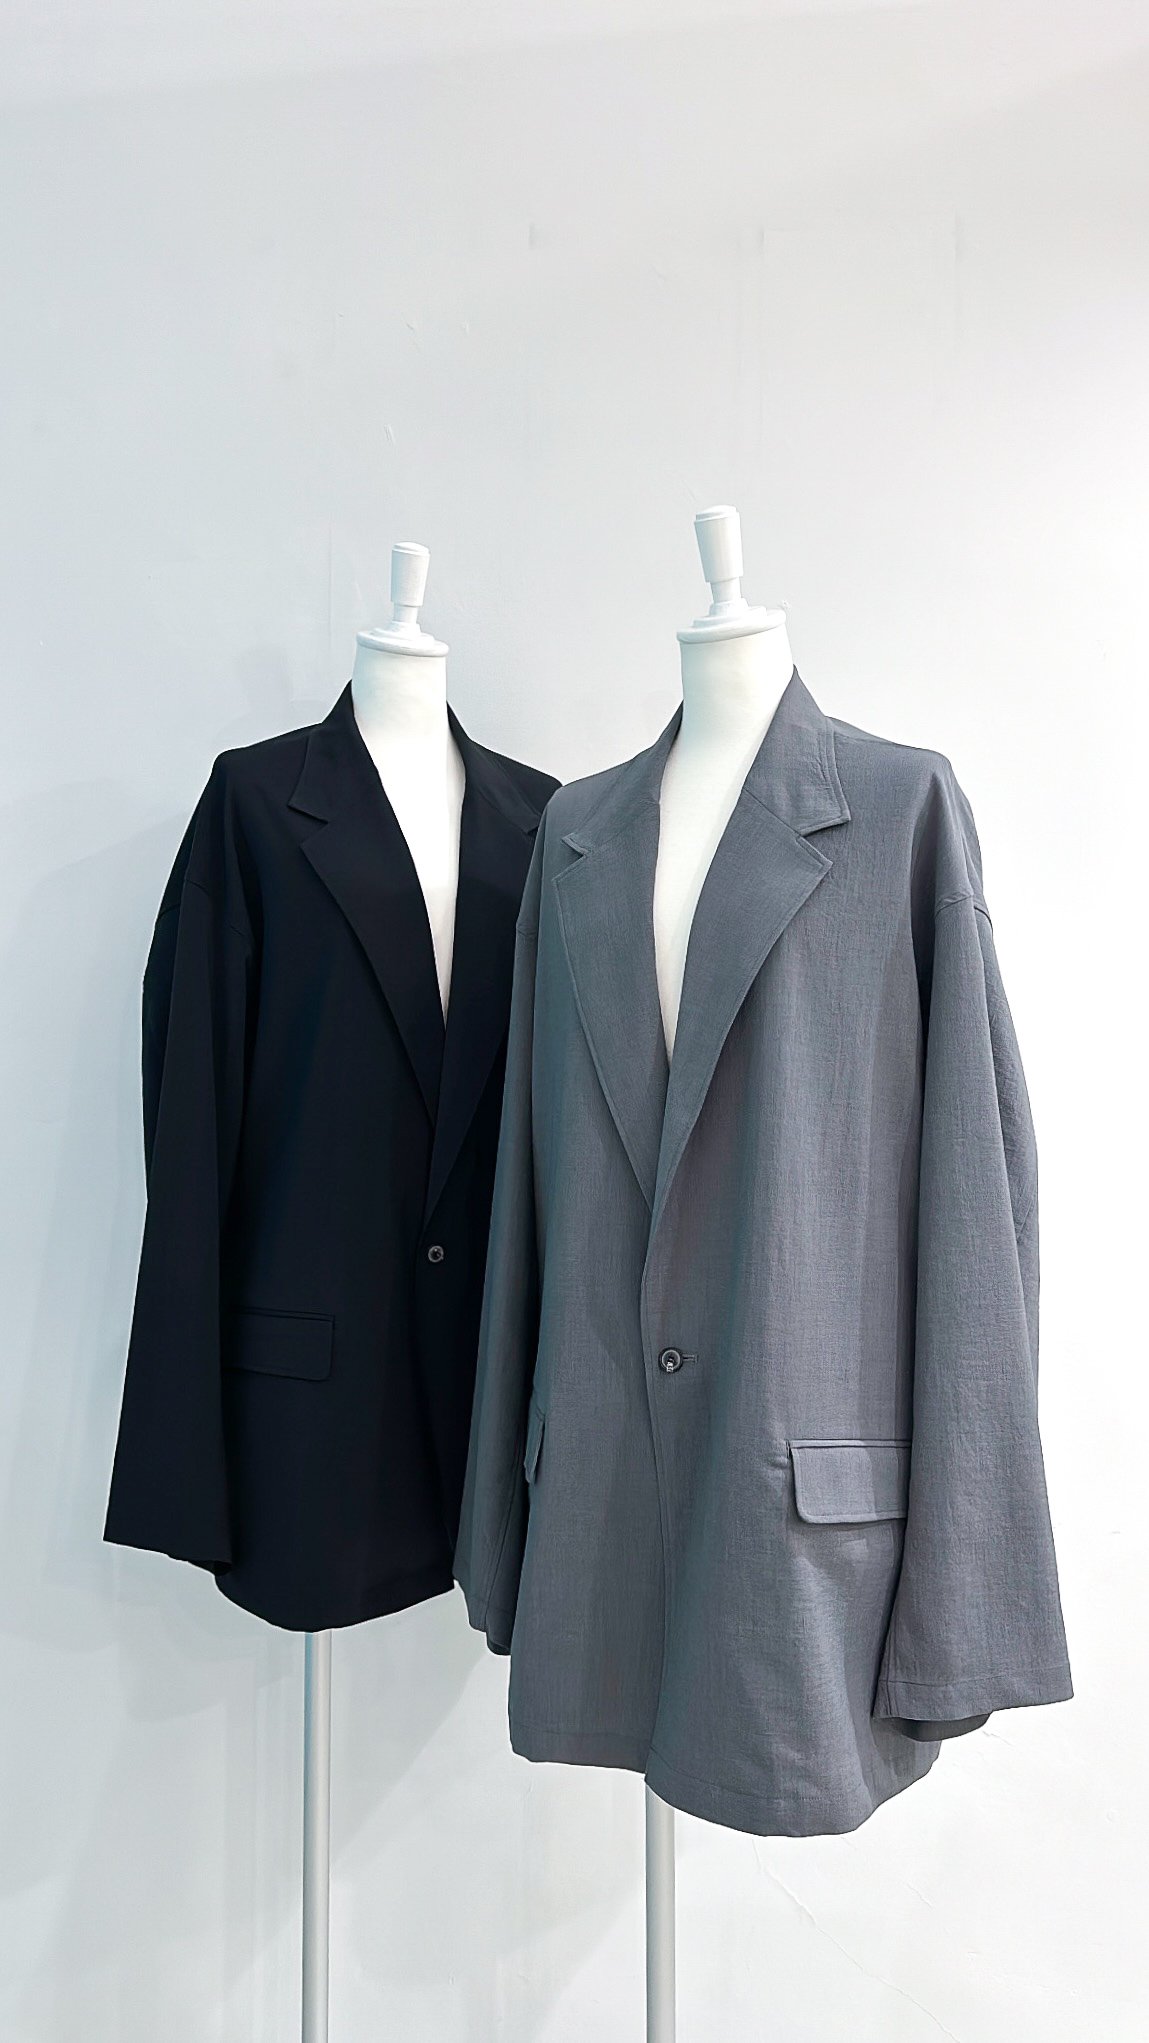 <img class='new_mark_img1' src='https://img.shop-pro.jp/img/new/icons47.gif' style='border:none;display:inline;margin:0px;padding:0px;width:auto;' />SUIT JACKET